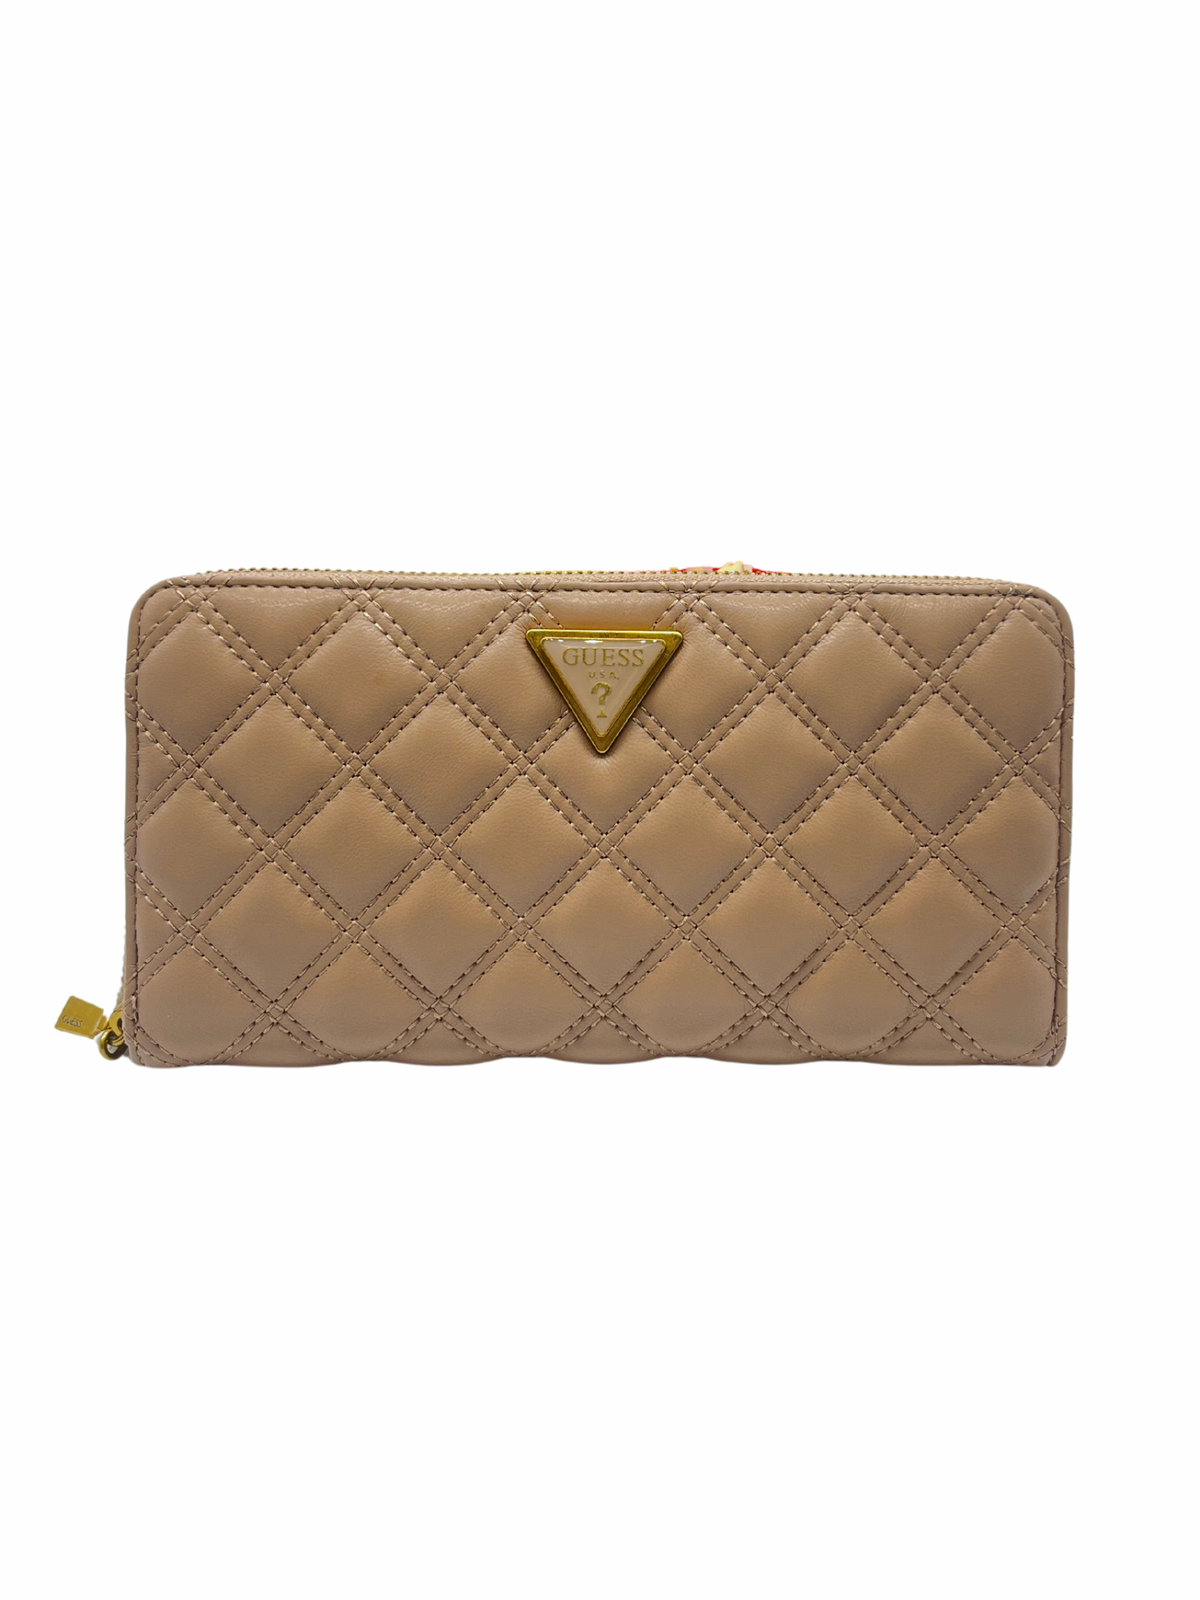 Guess Quilted Beige Purse (Medium)